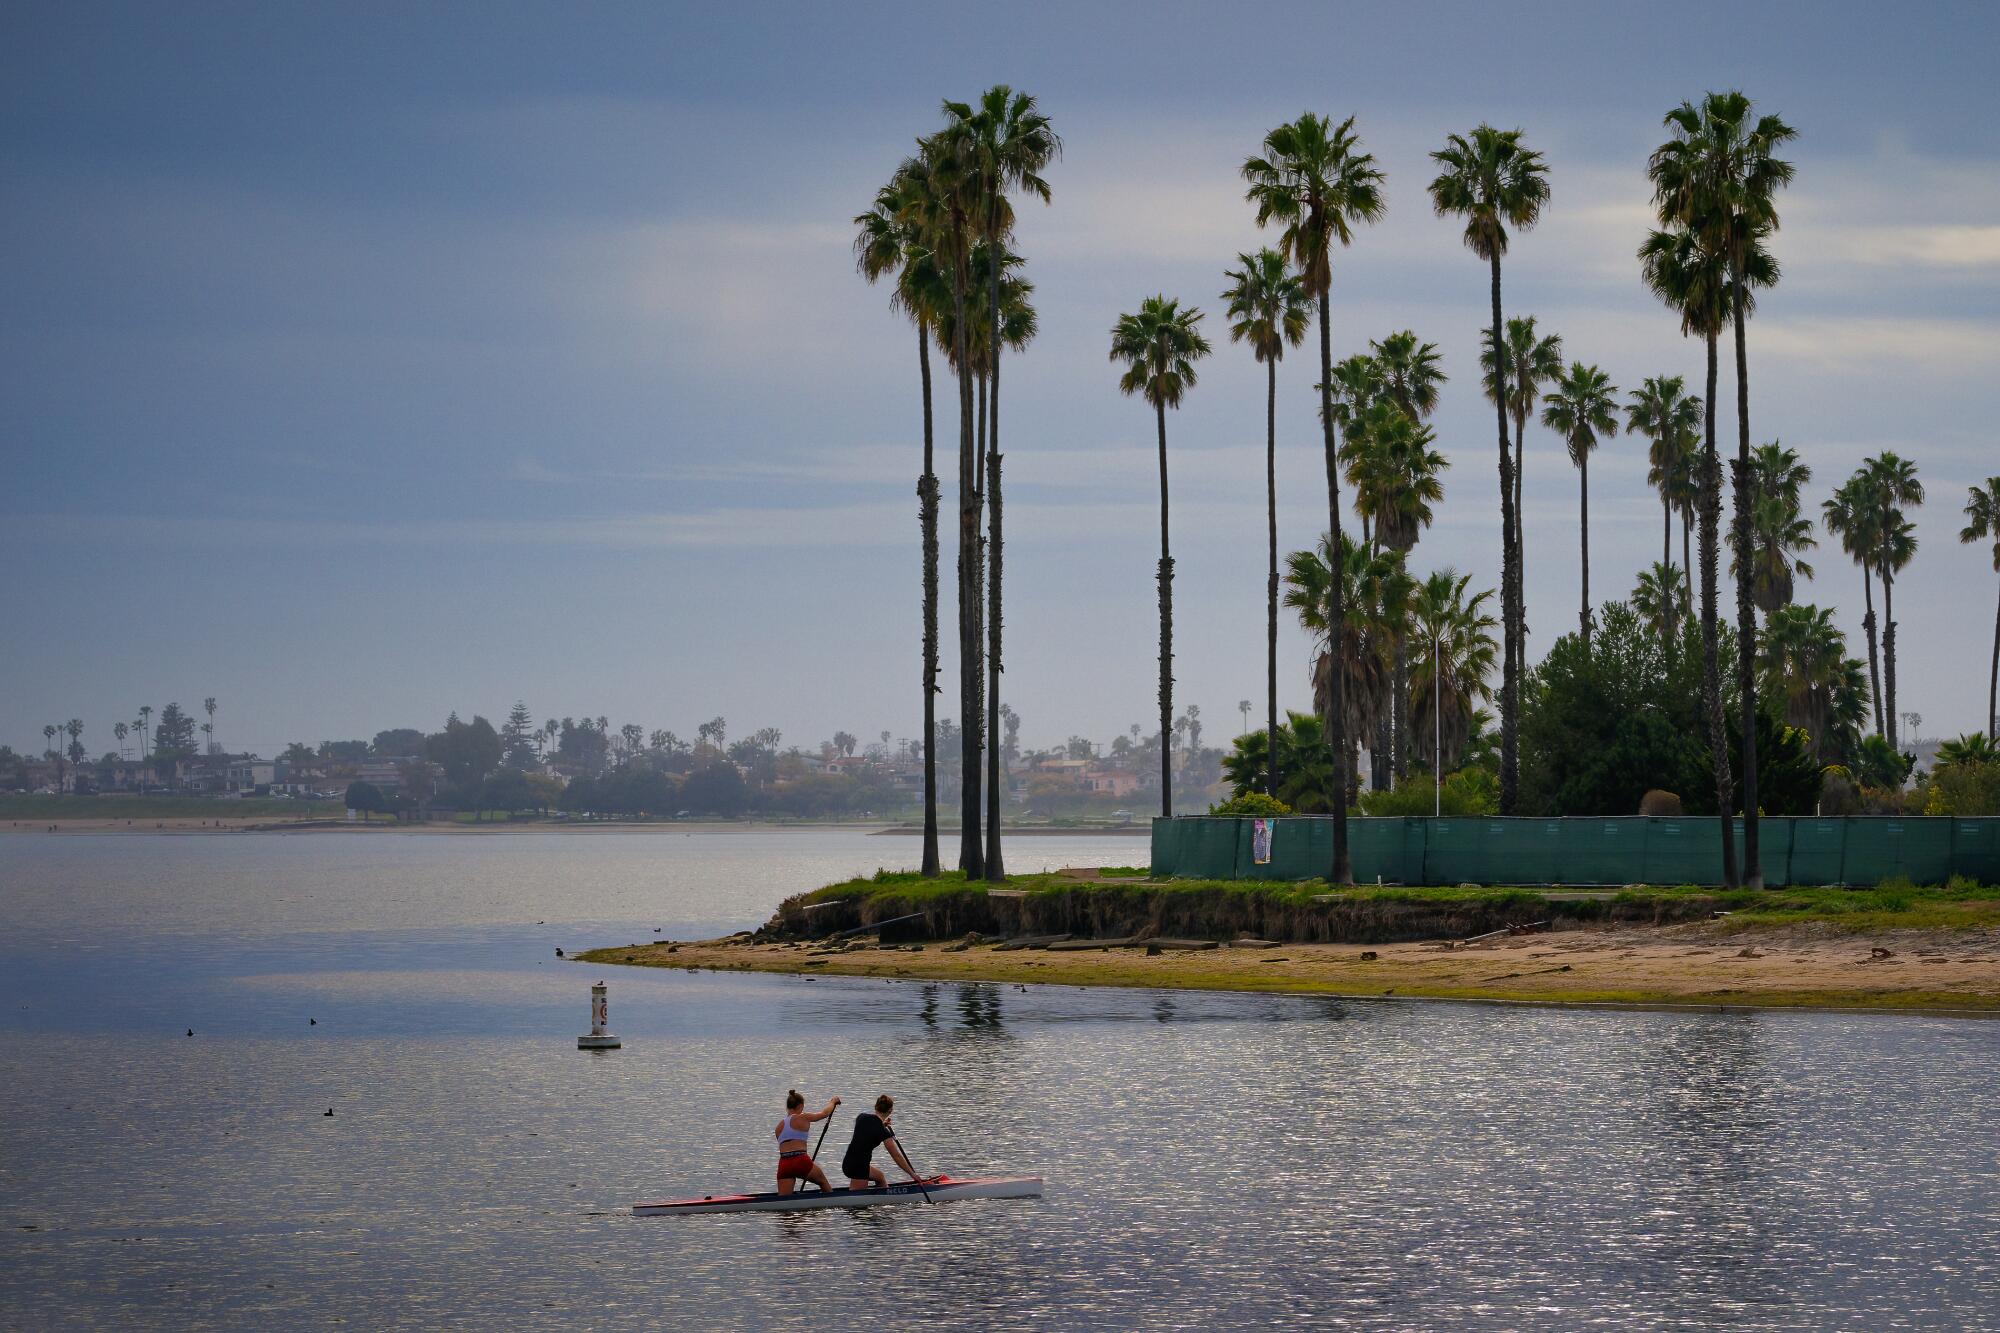 Two people paddle past a palm tree-covered promontory on a sunny bay.